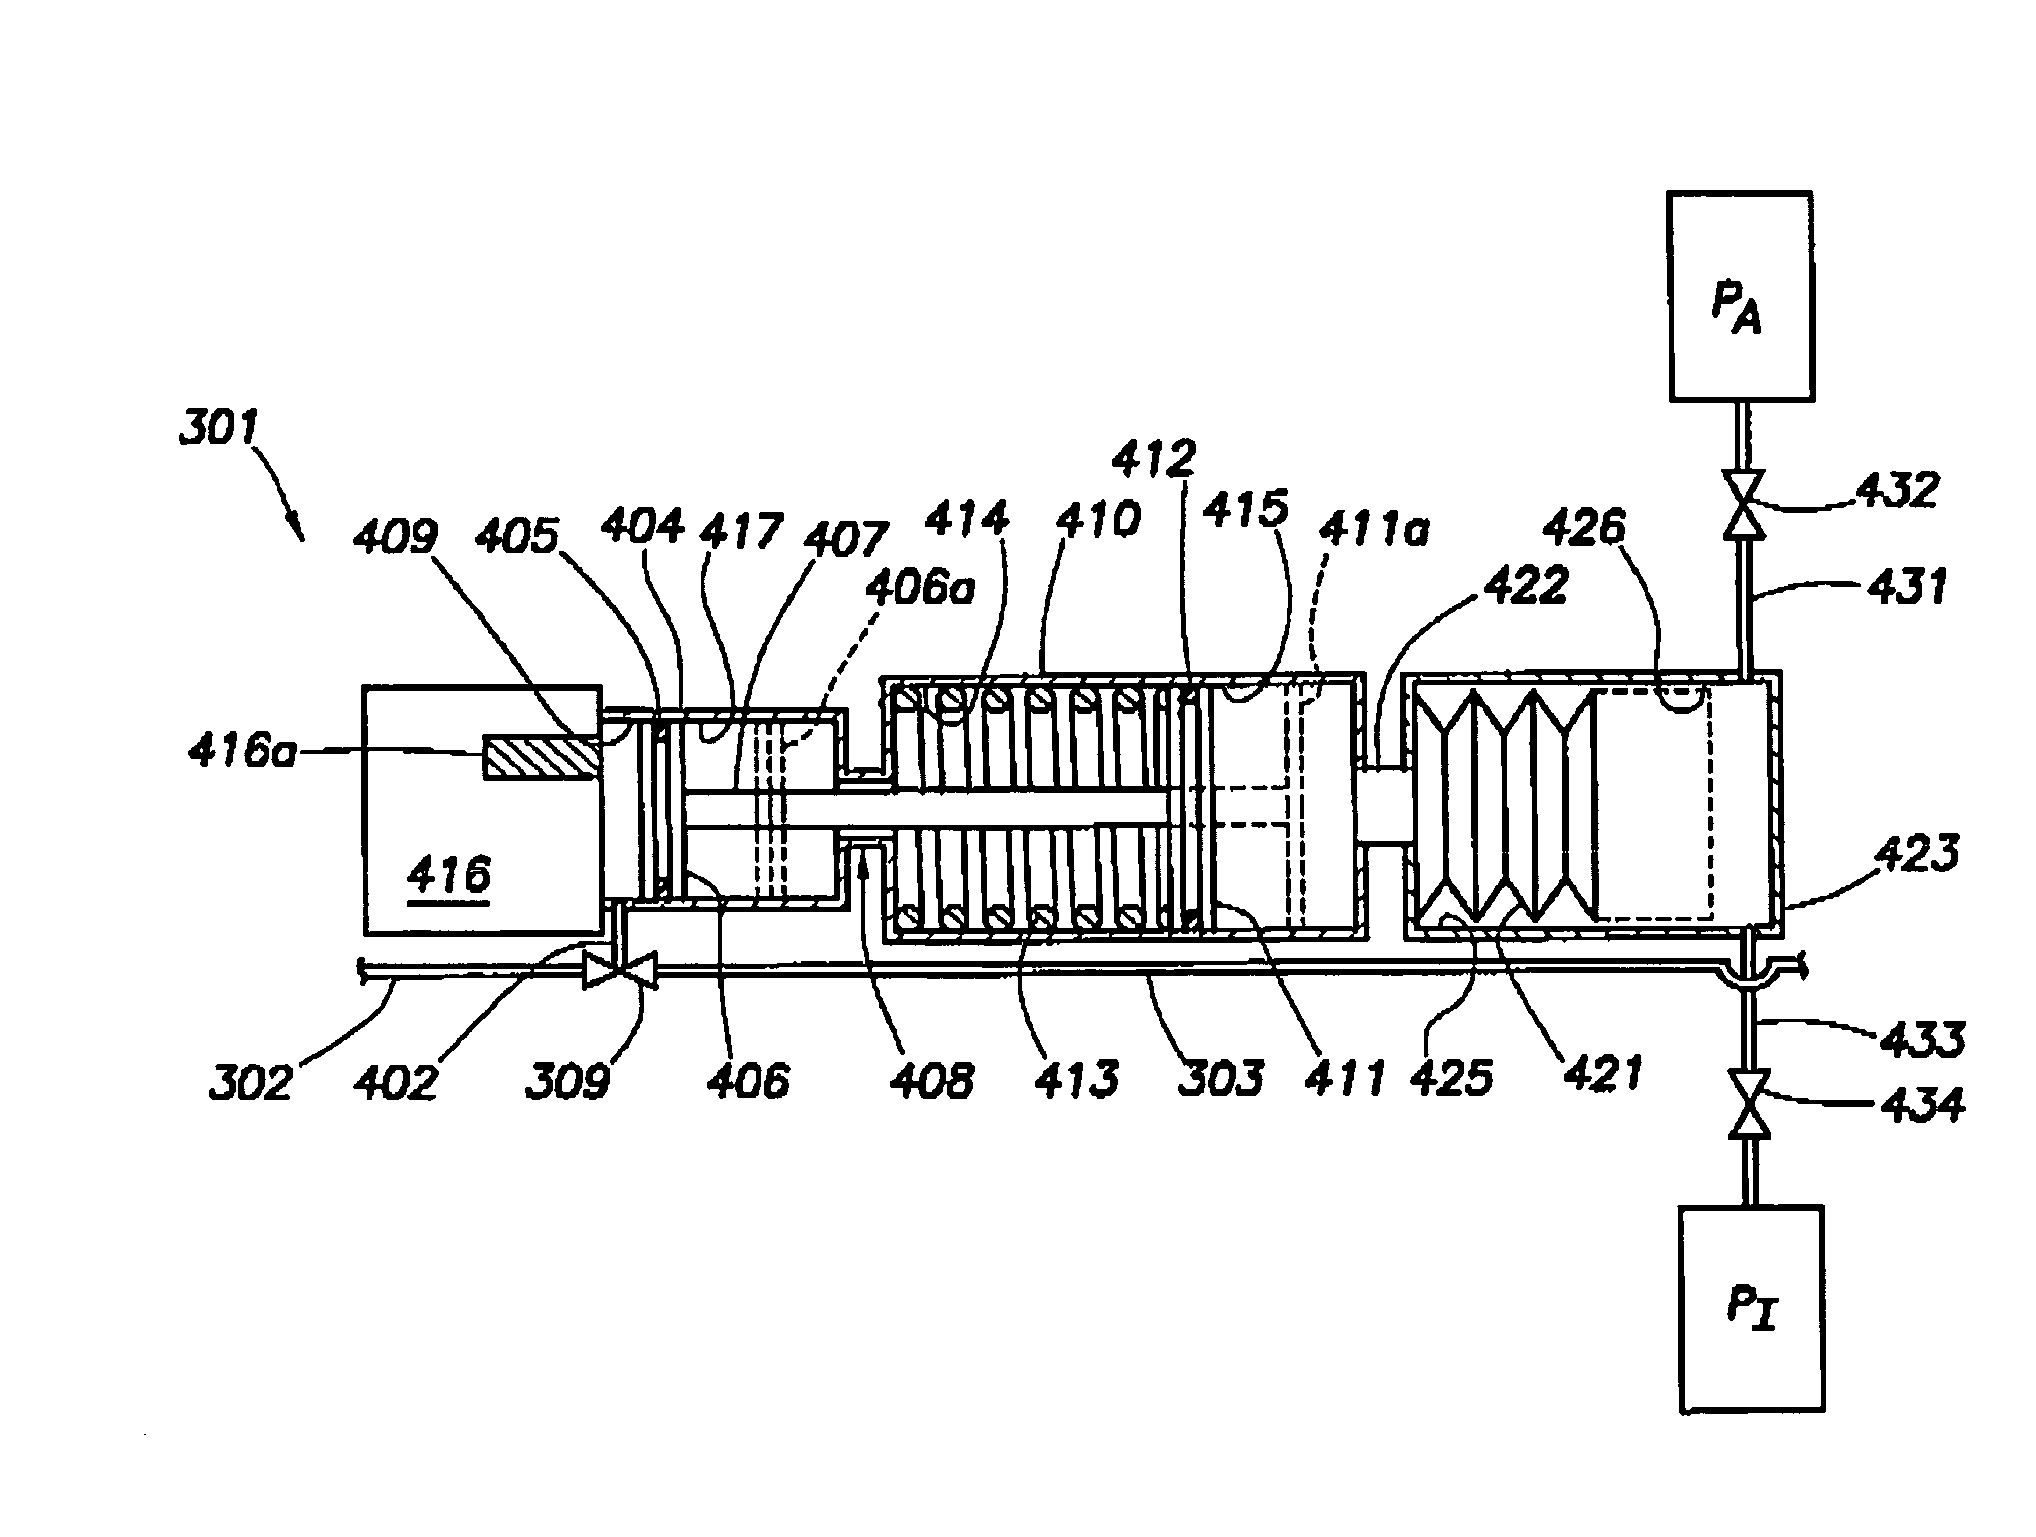 Downhole fluid pumping apparatus and method